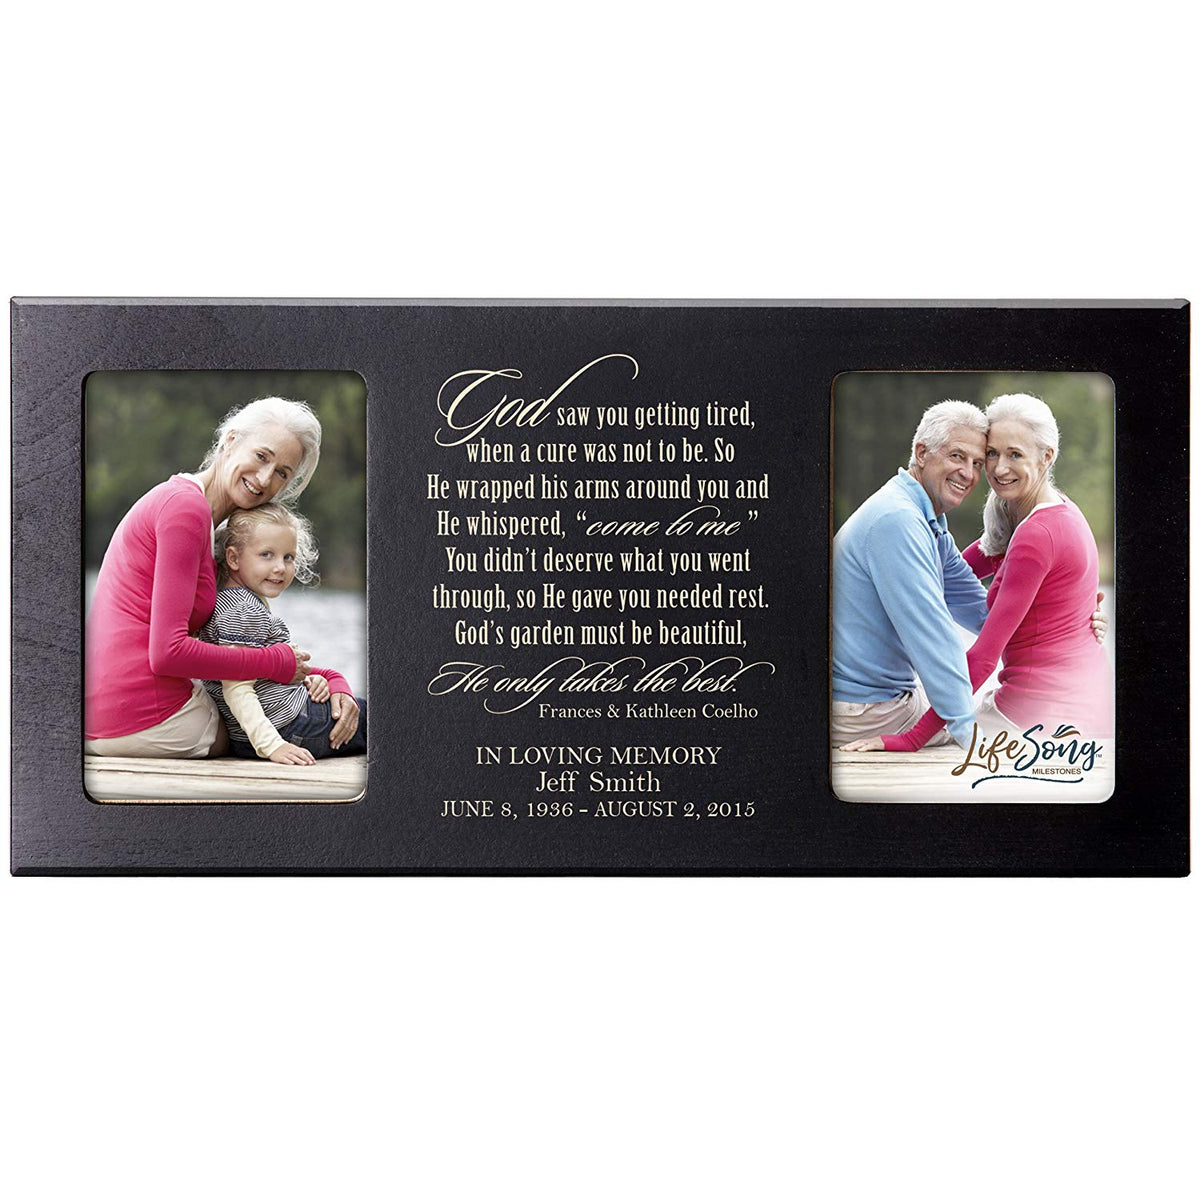 Custom Wooden Memorial Double Picture Frame holds 2-4x6 photo - God saw you - LifeSong Milestones